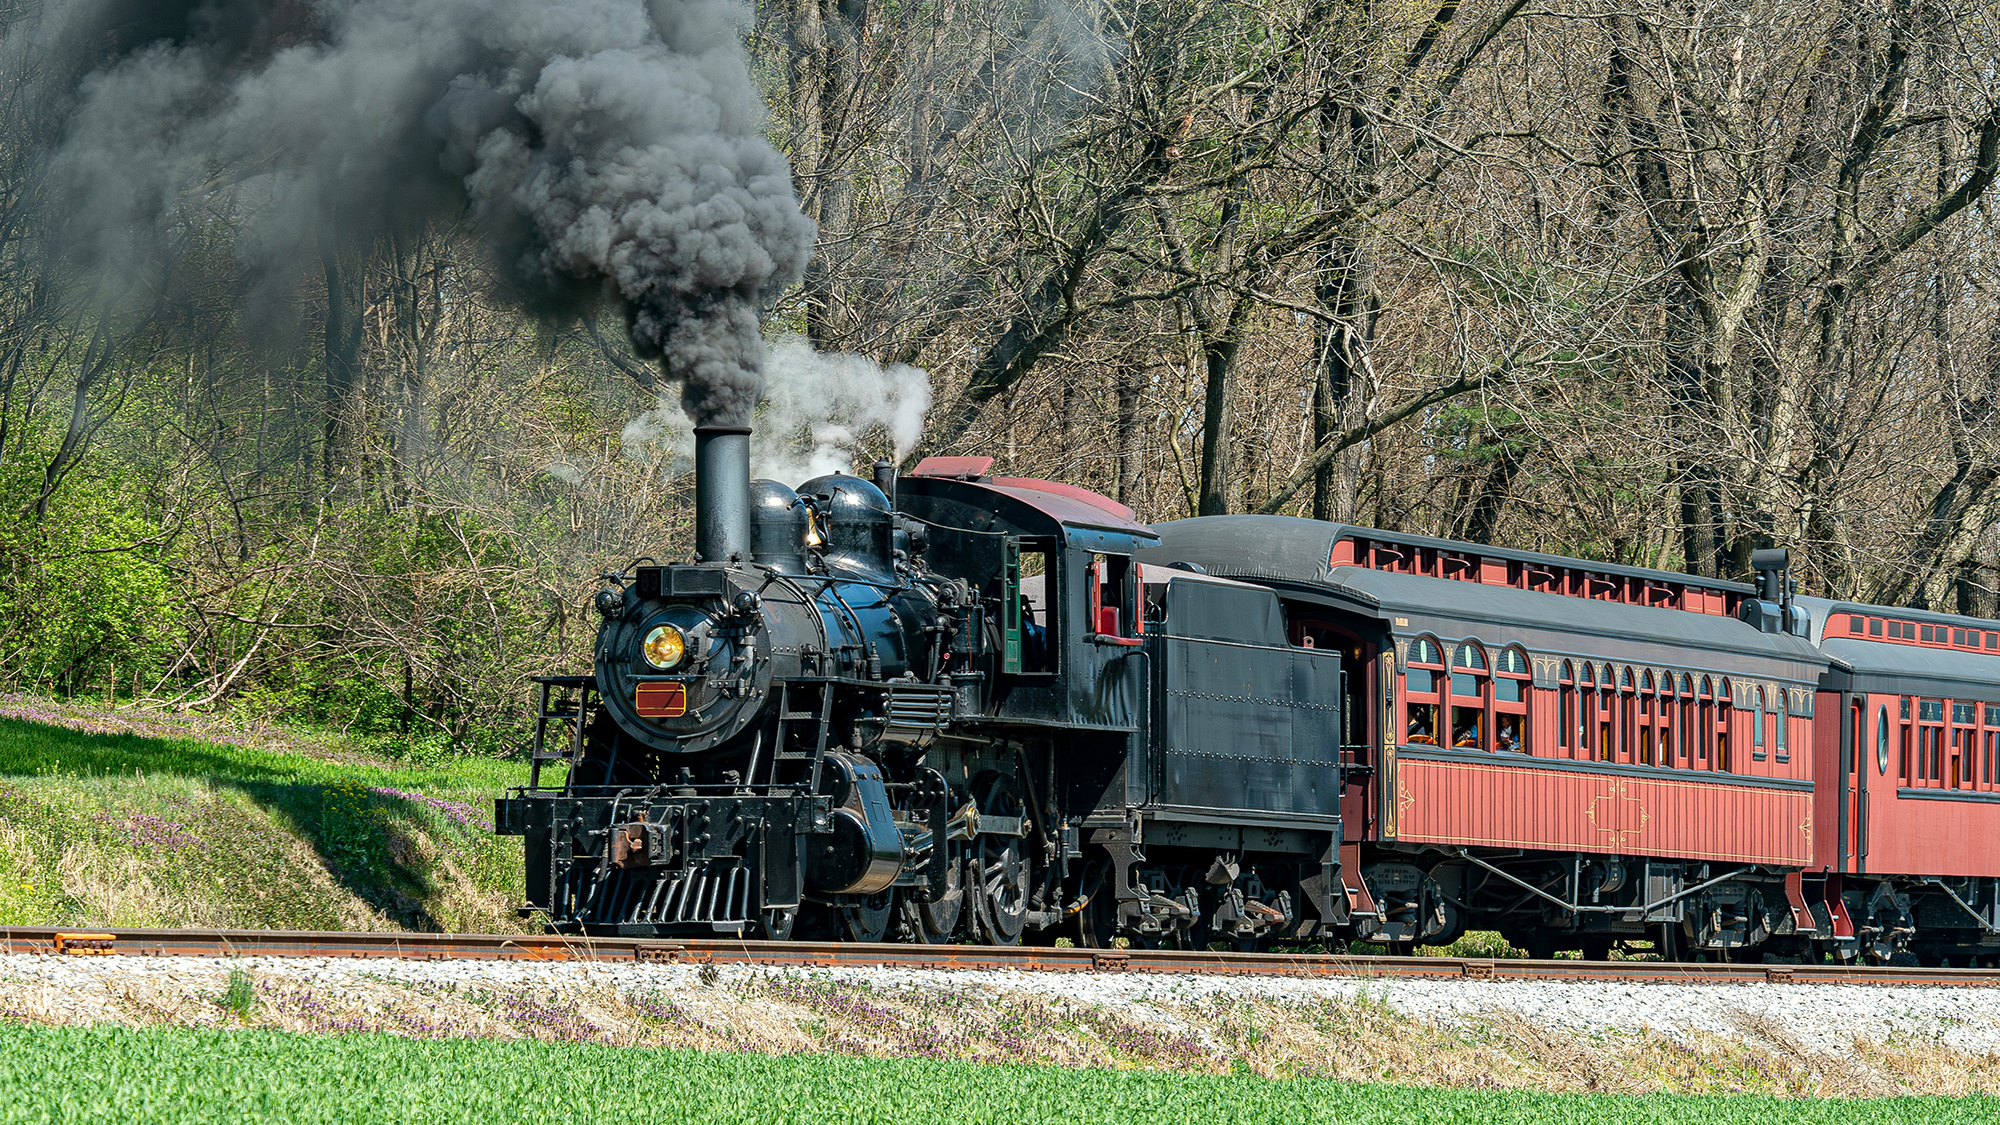 A steam passenger train moving slowly blowing lots of black smoke